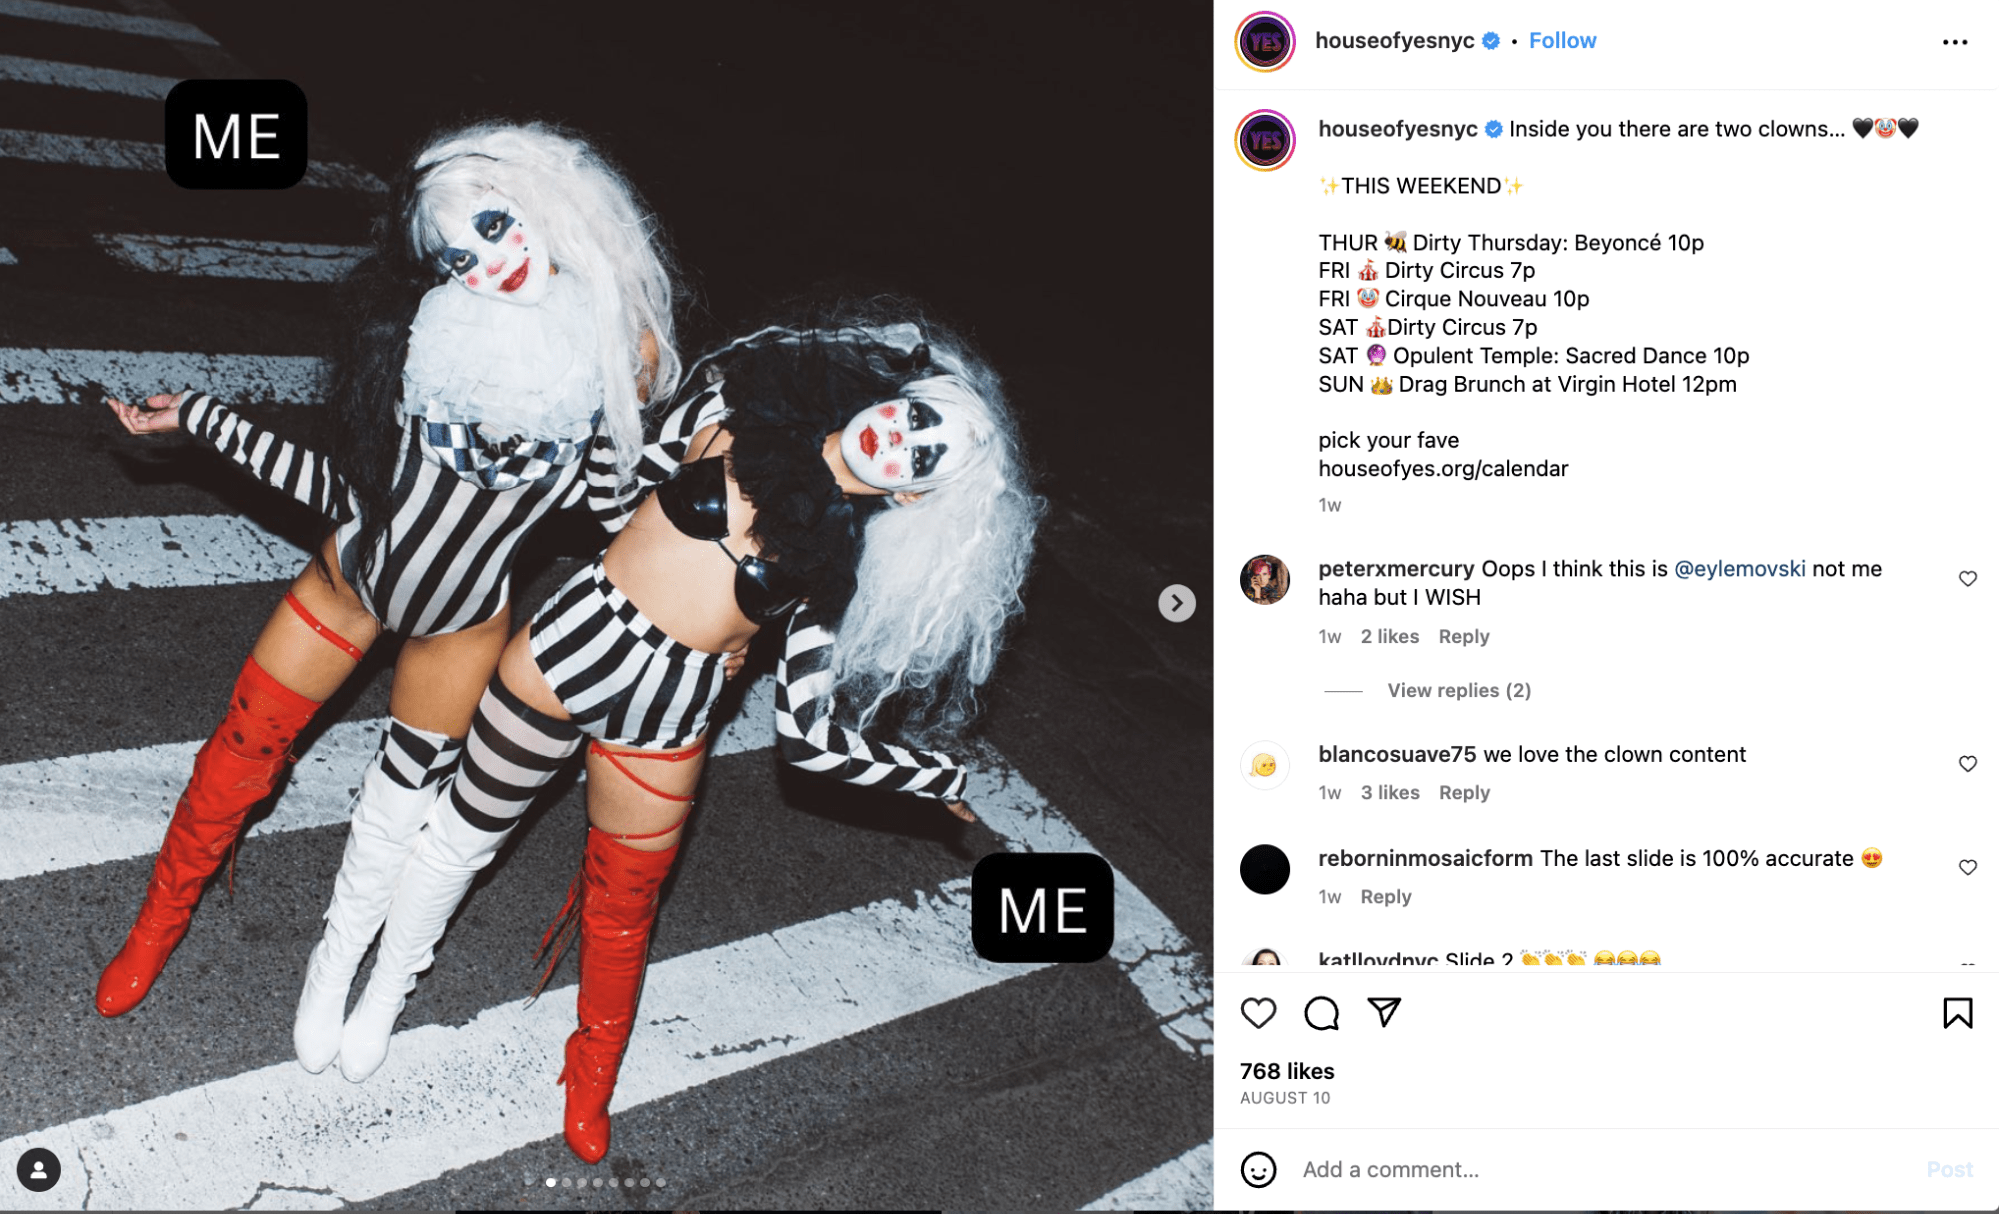 House of Yes NYC's Instagram post